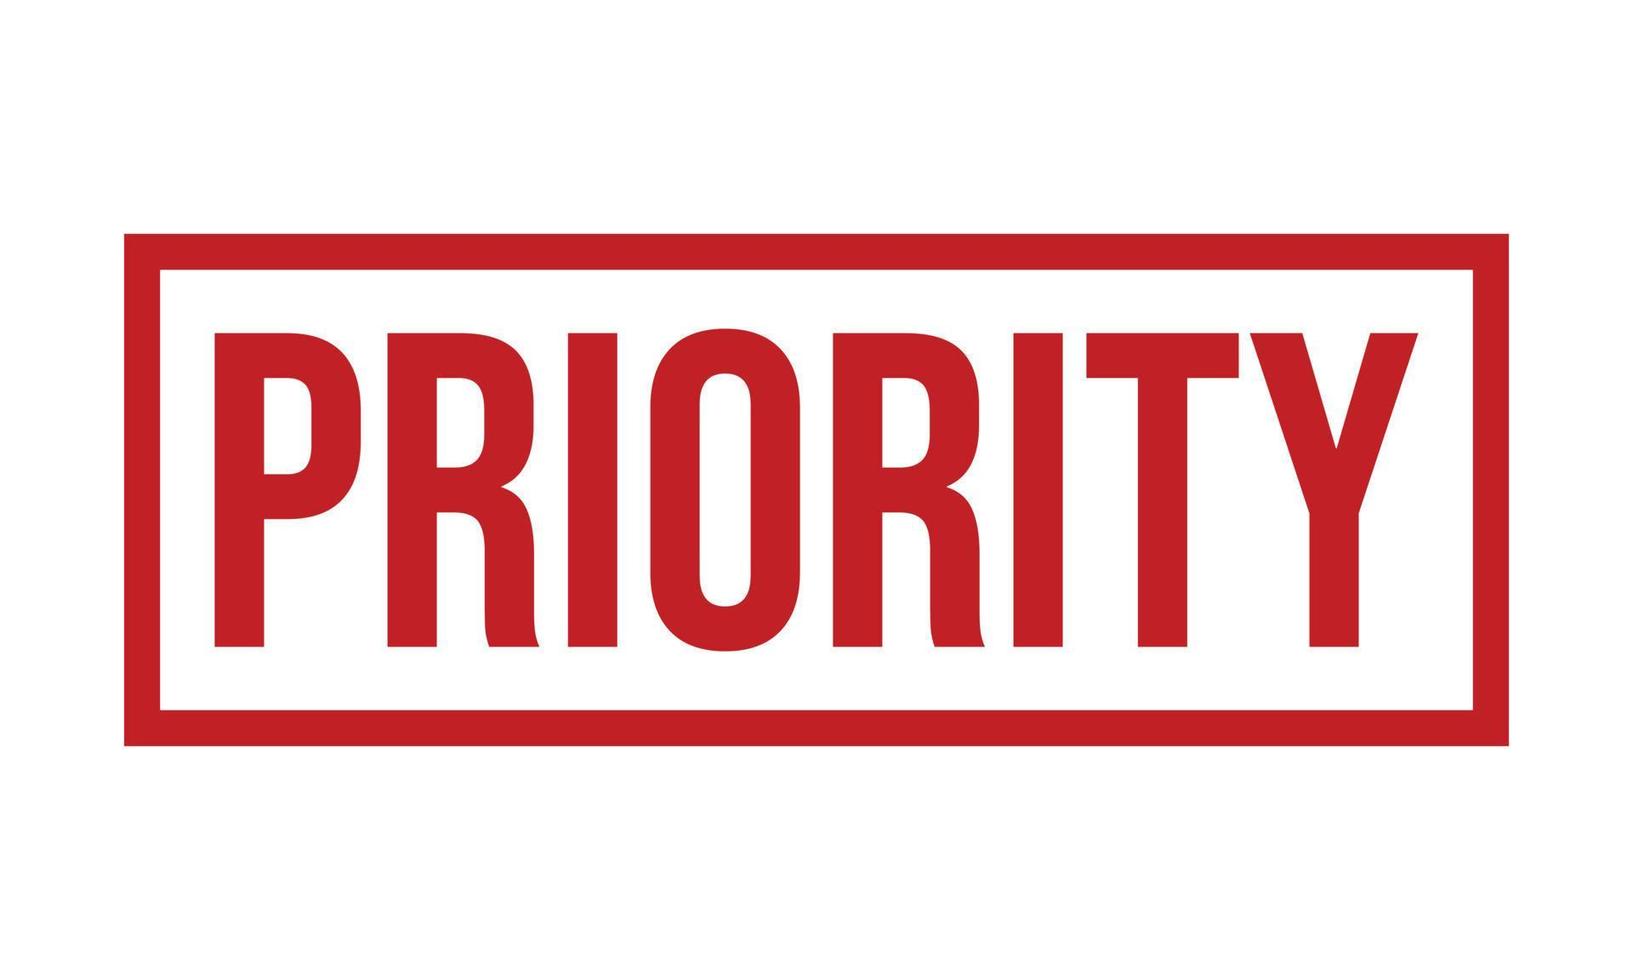 Priority Rubber Stamp. Red Priority Rubber Grunge Stamp Seal Vector Illustration